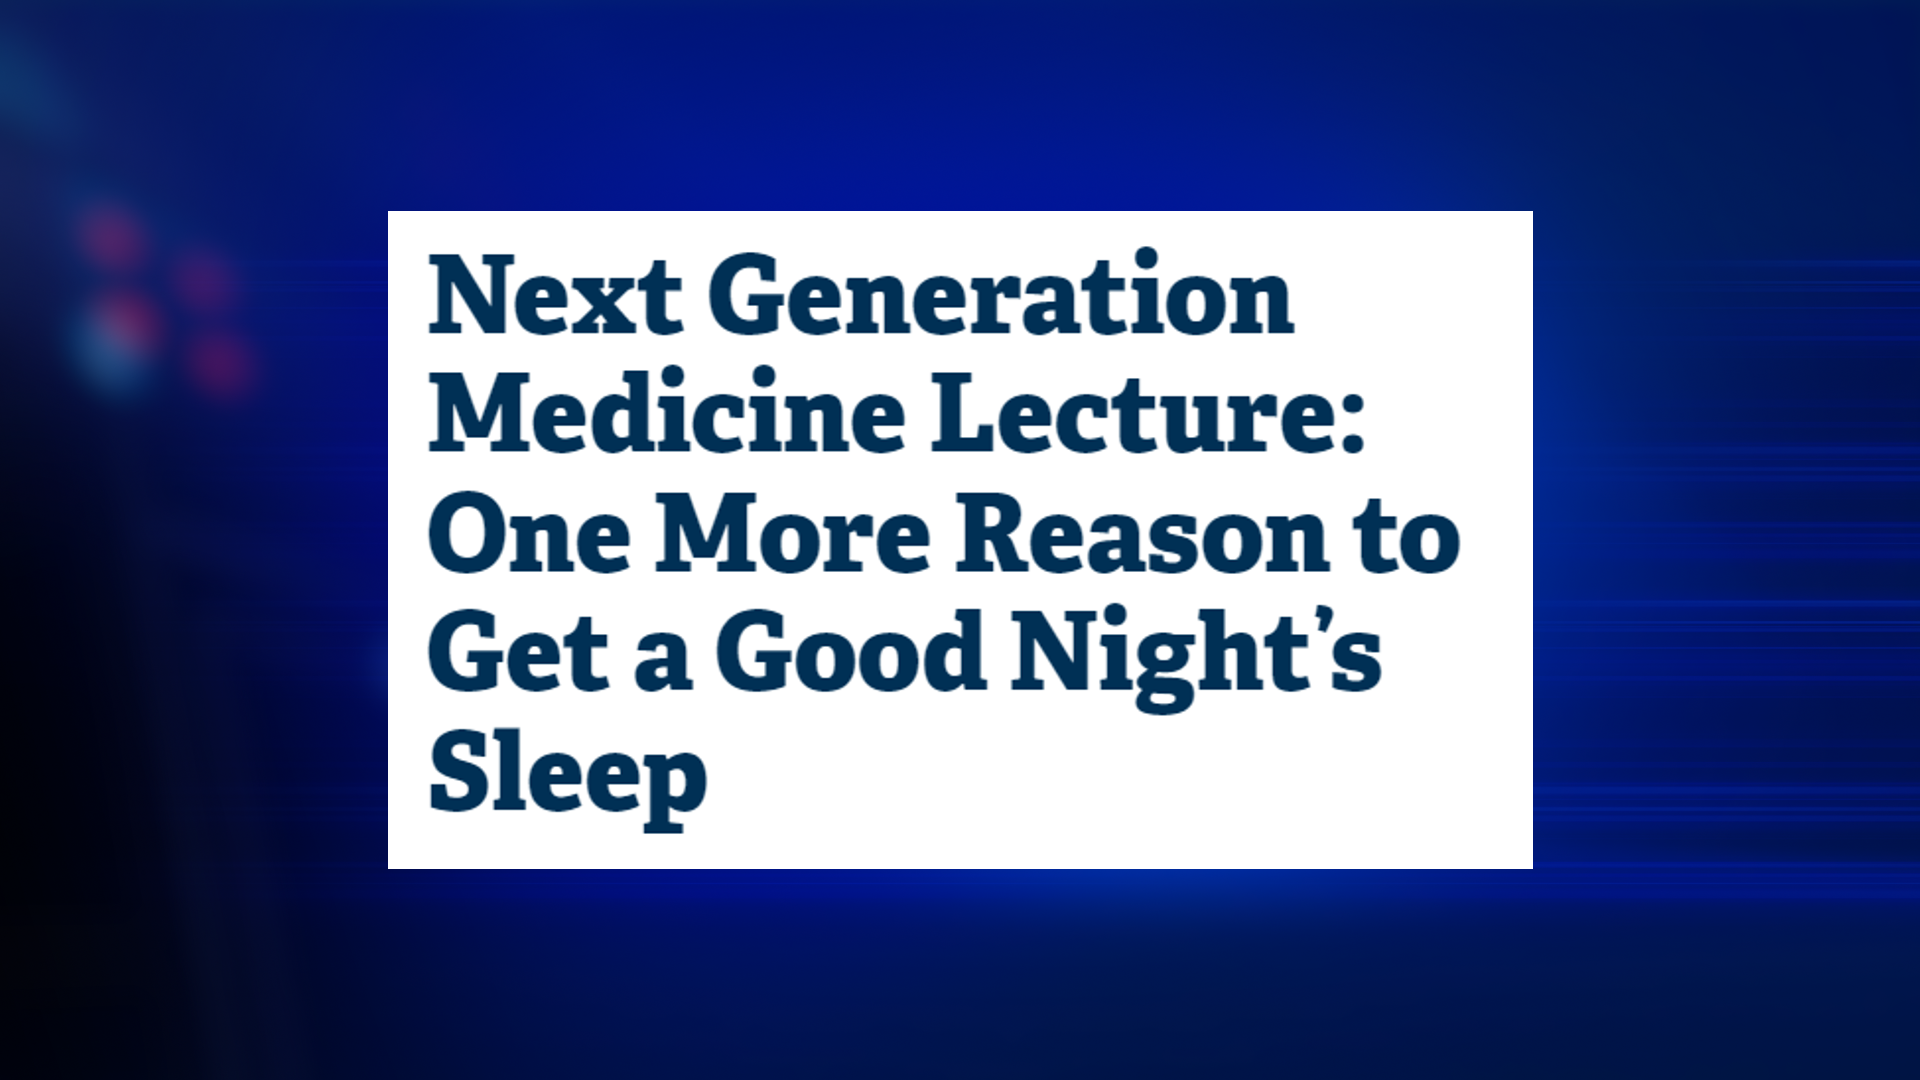 Getting poor sleep potentially linked to dementia, cognitive impairment [Video]